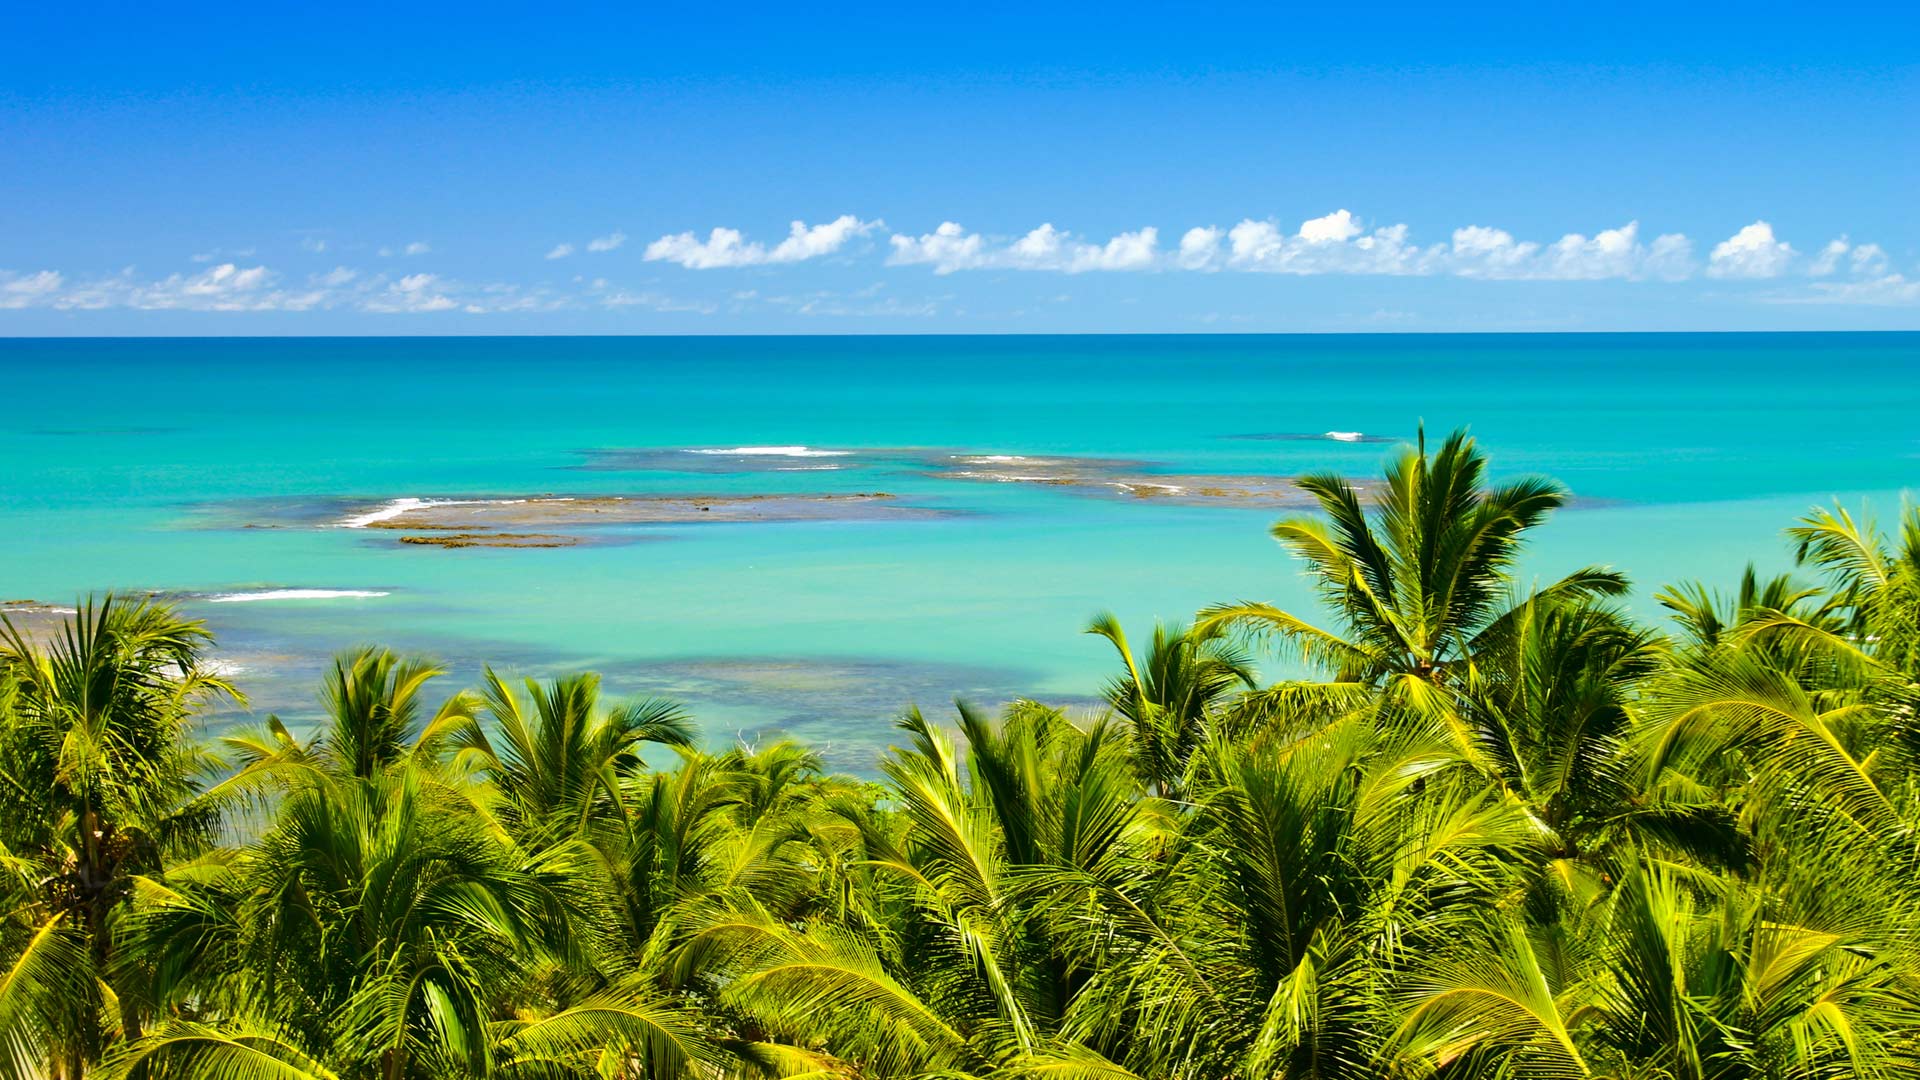 Bing Images Wallpapers 22 - [1920 x 1080]